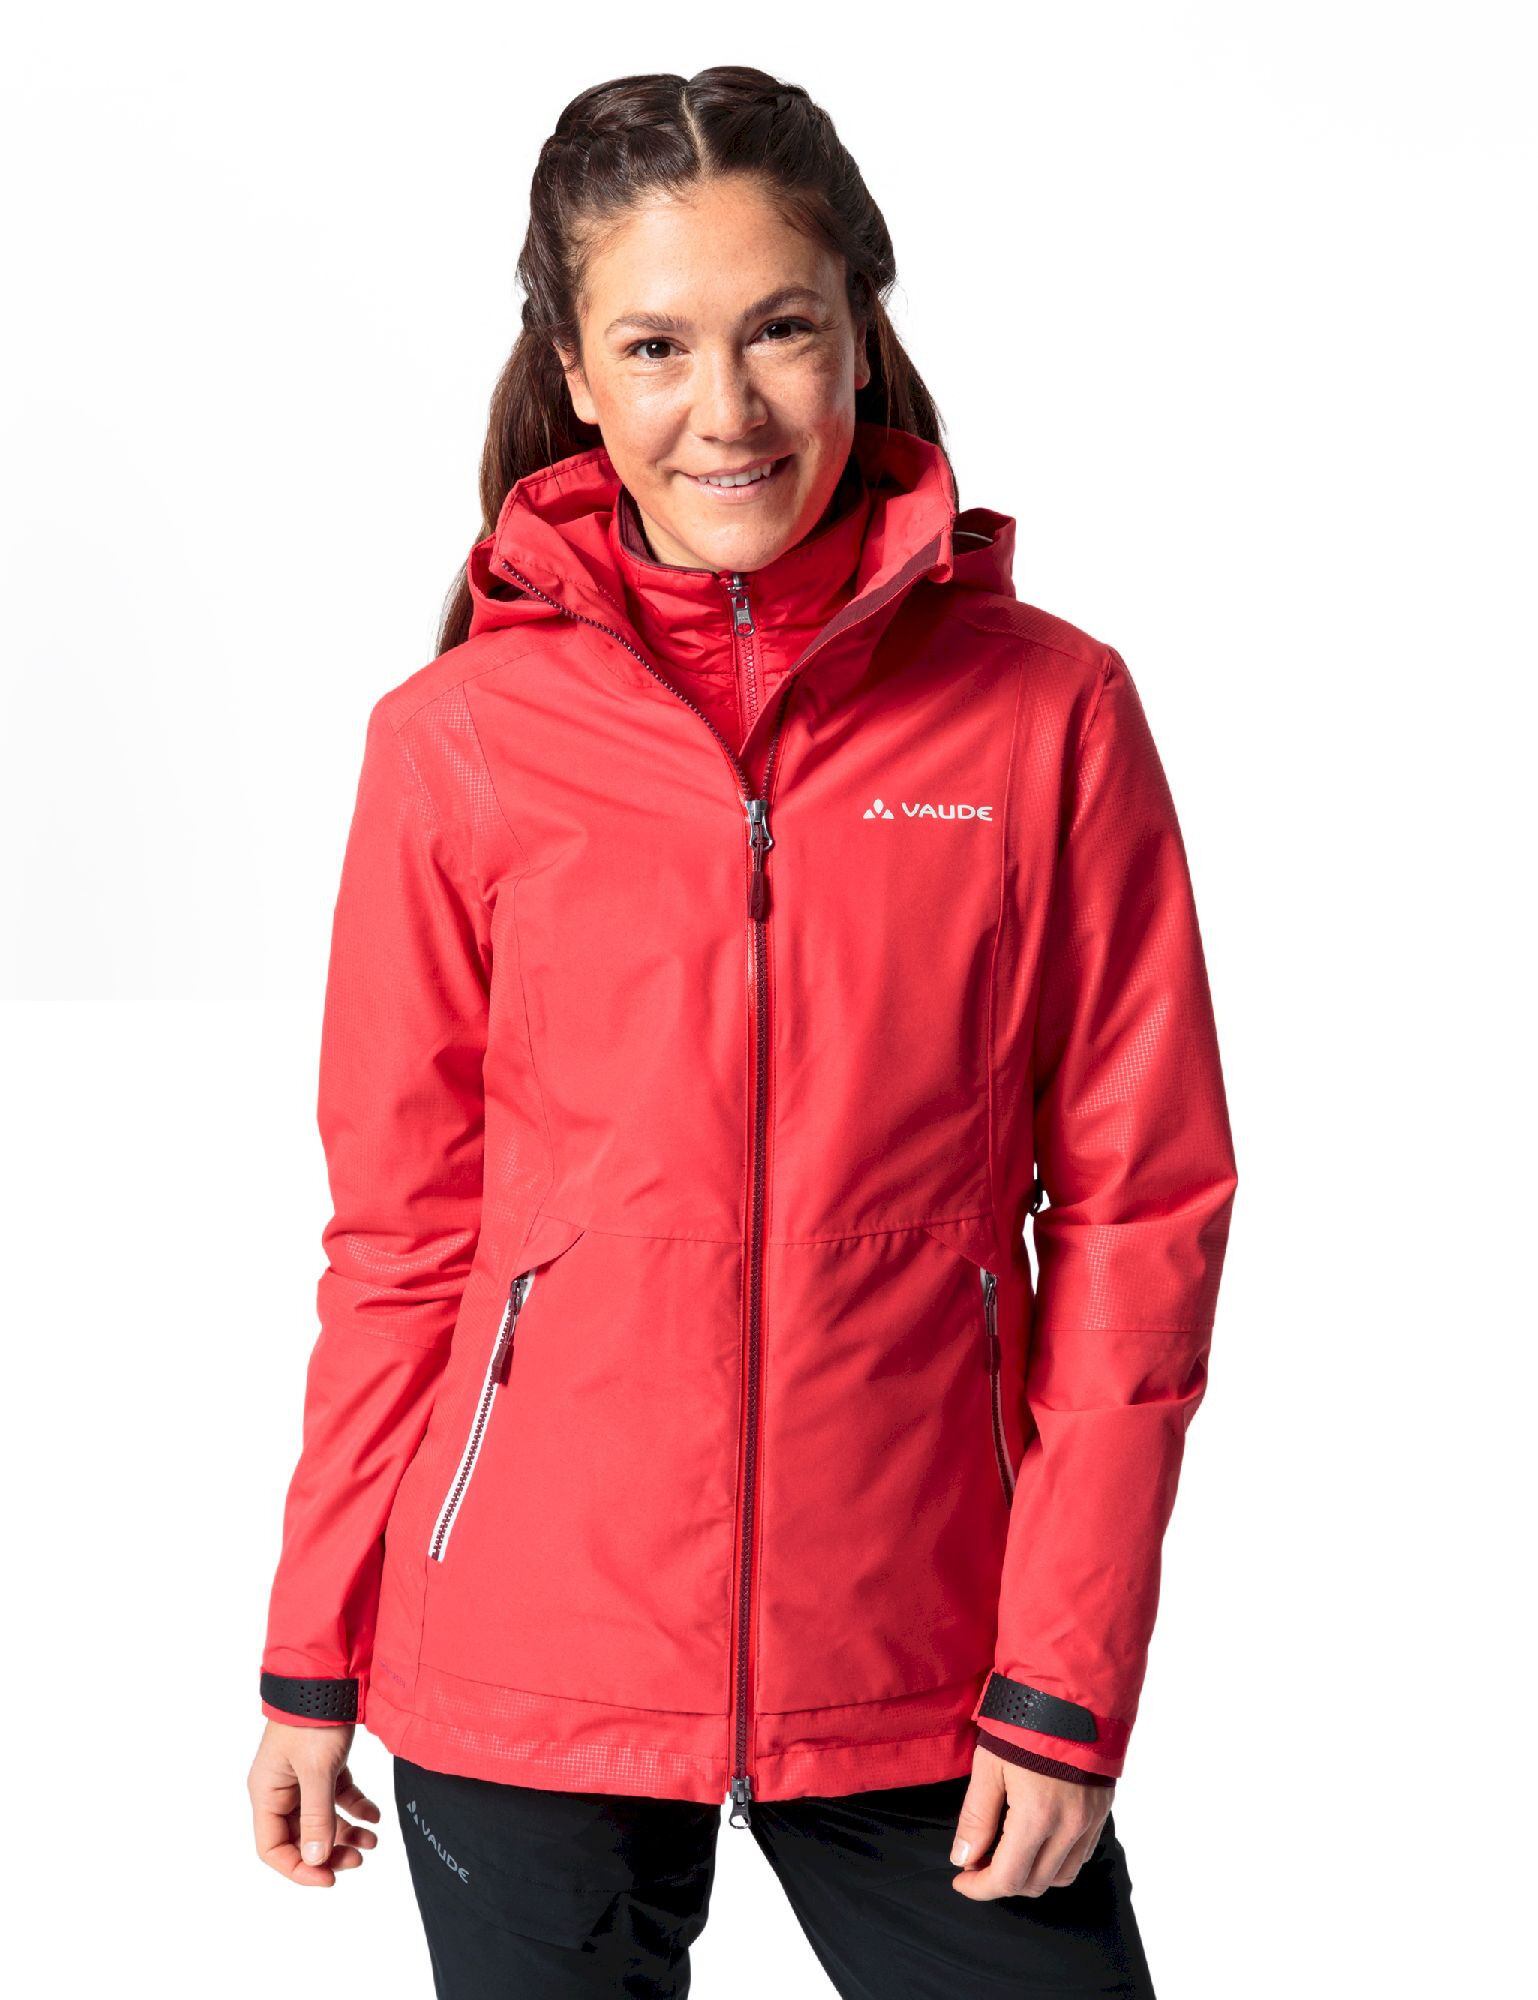 Vaude Elope 3in1 Jacket - Giacca doppia - Donna